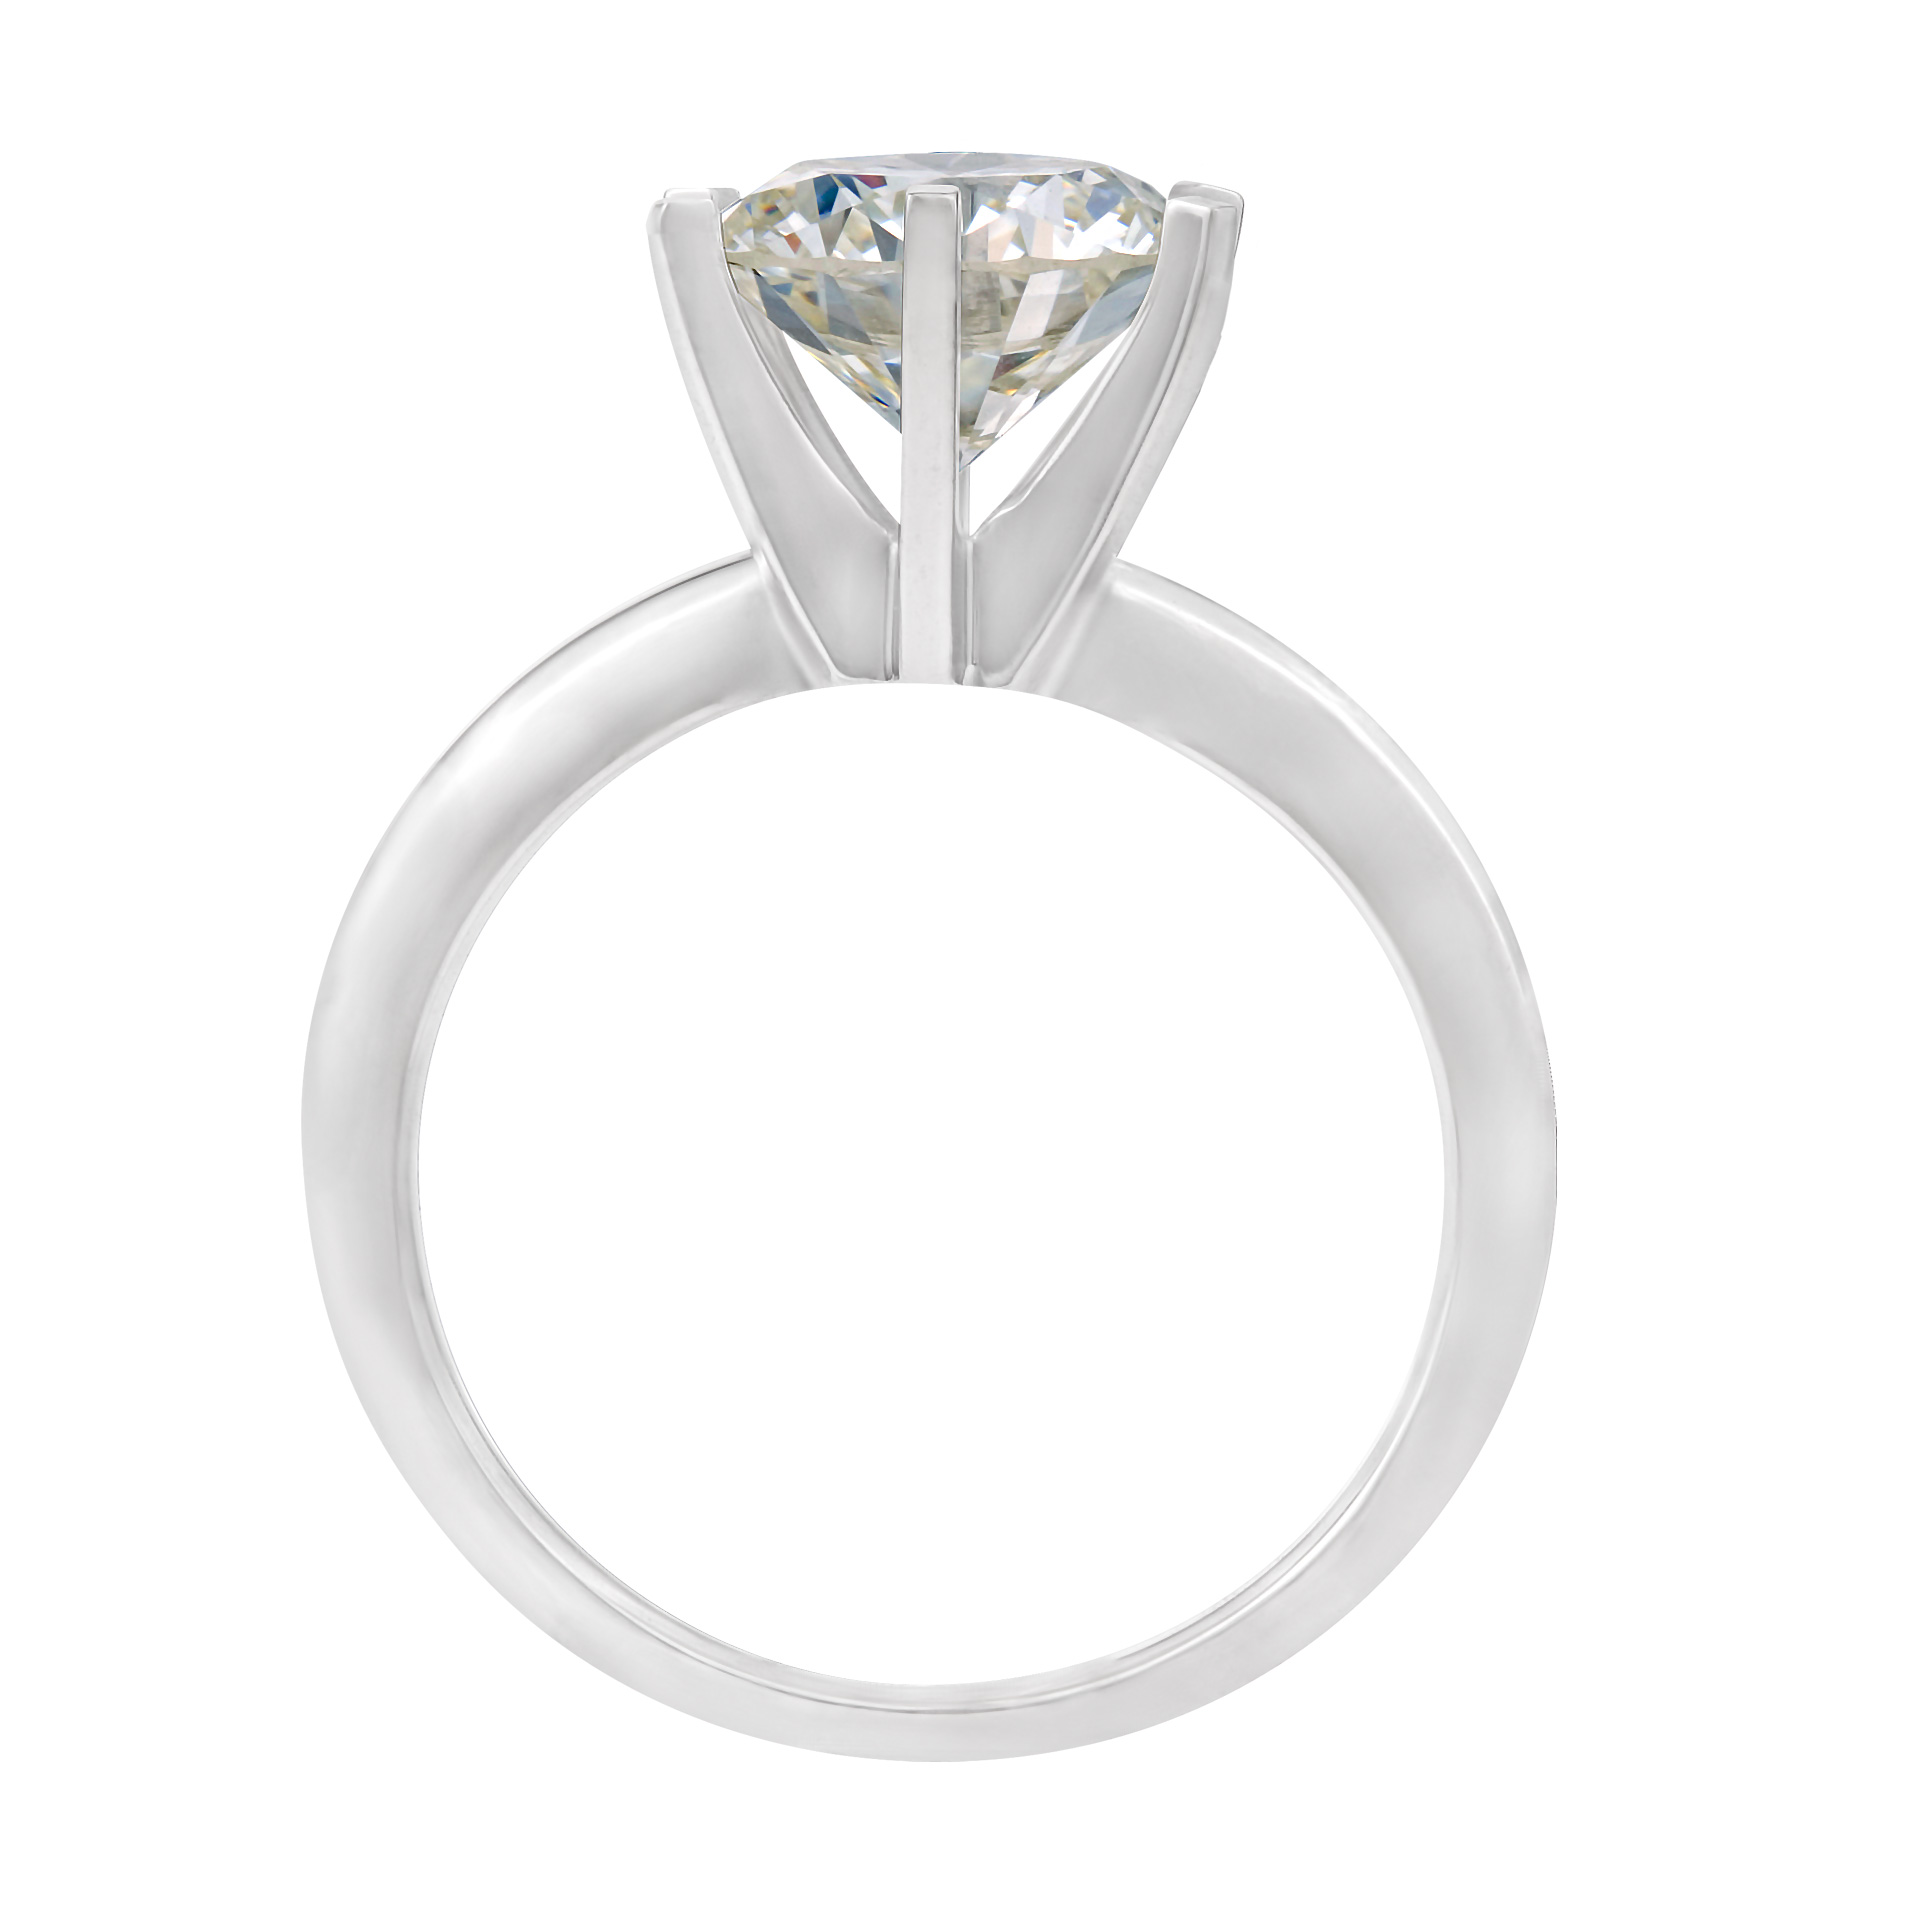 Gia Certified Round Diamond 2.19 Cts (L Color Vs2 Clarity) In A Platinum Setting With Diamonds image 2